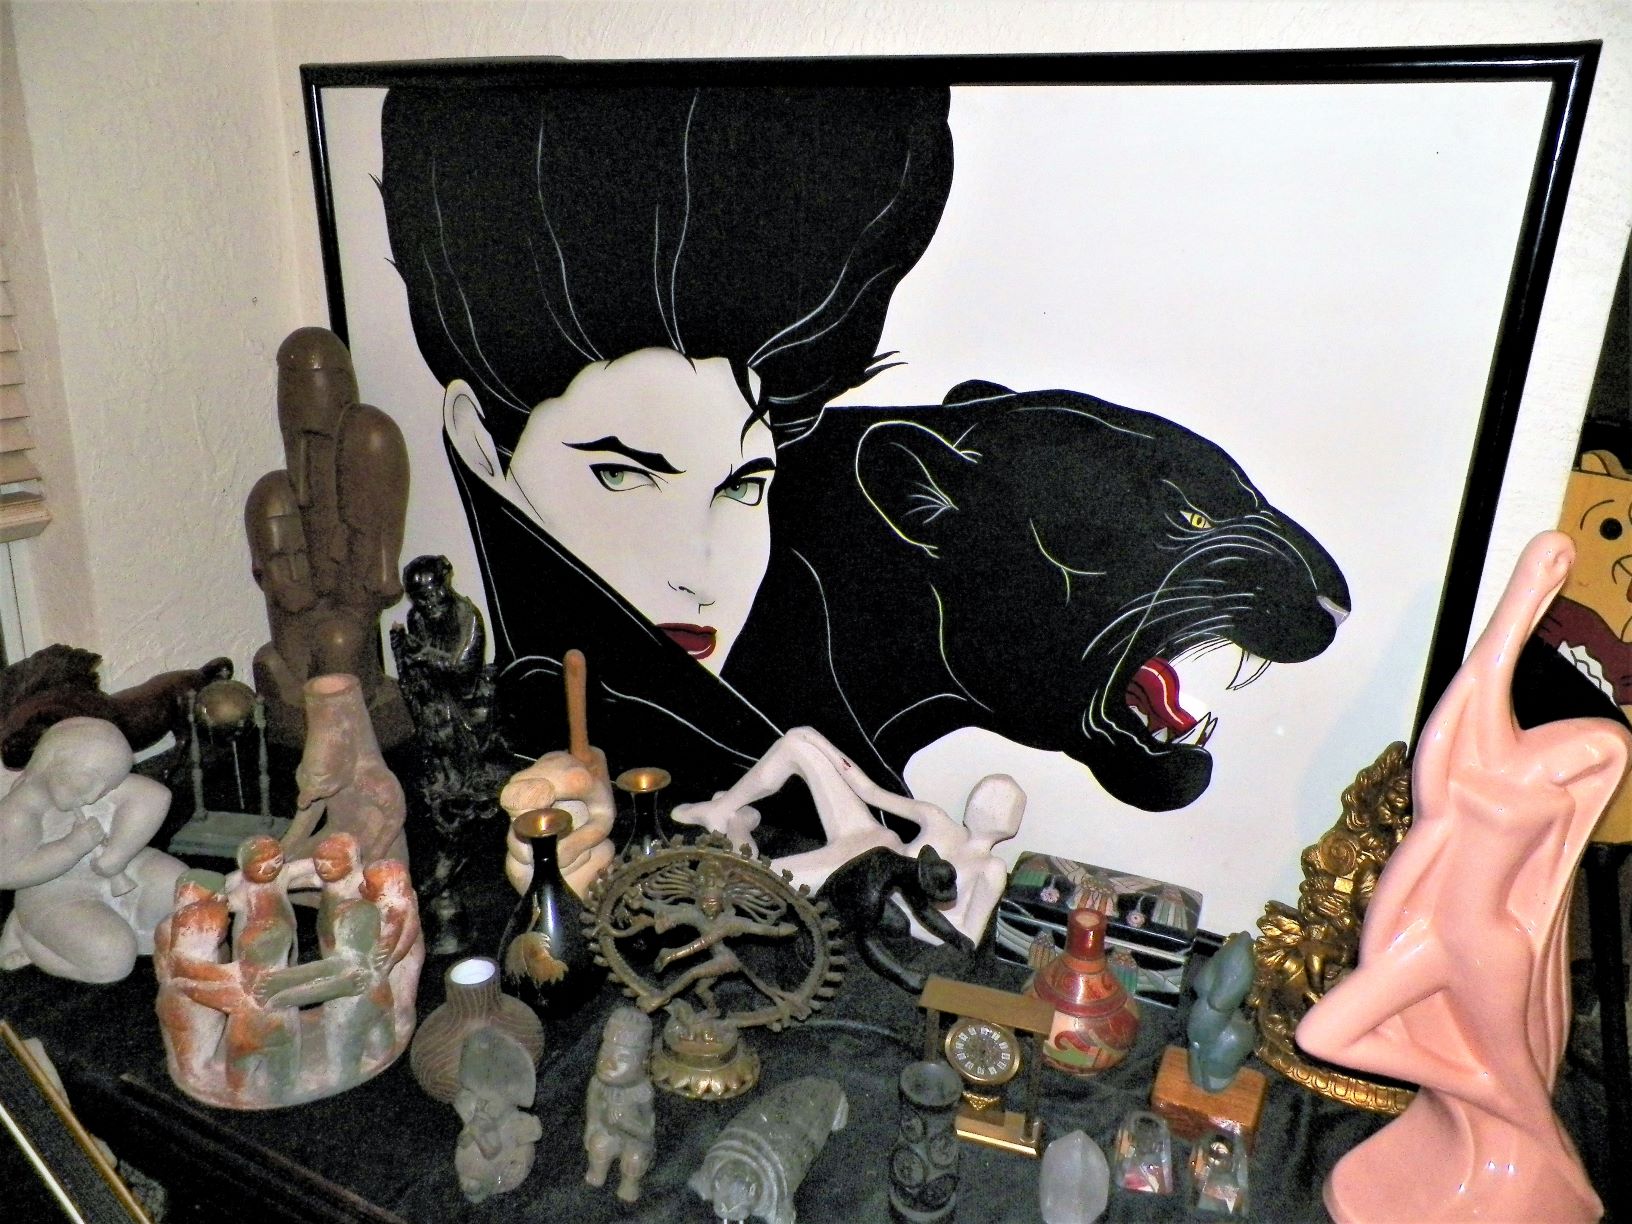 ART PAINTING NAGEL PAINTING LARGE UNSIGNED 1AA.JPG